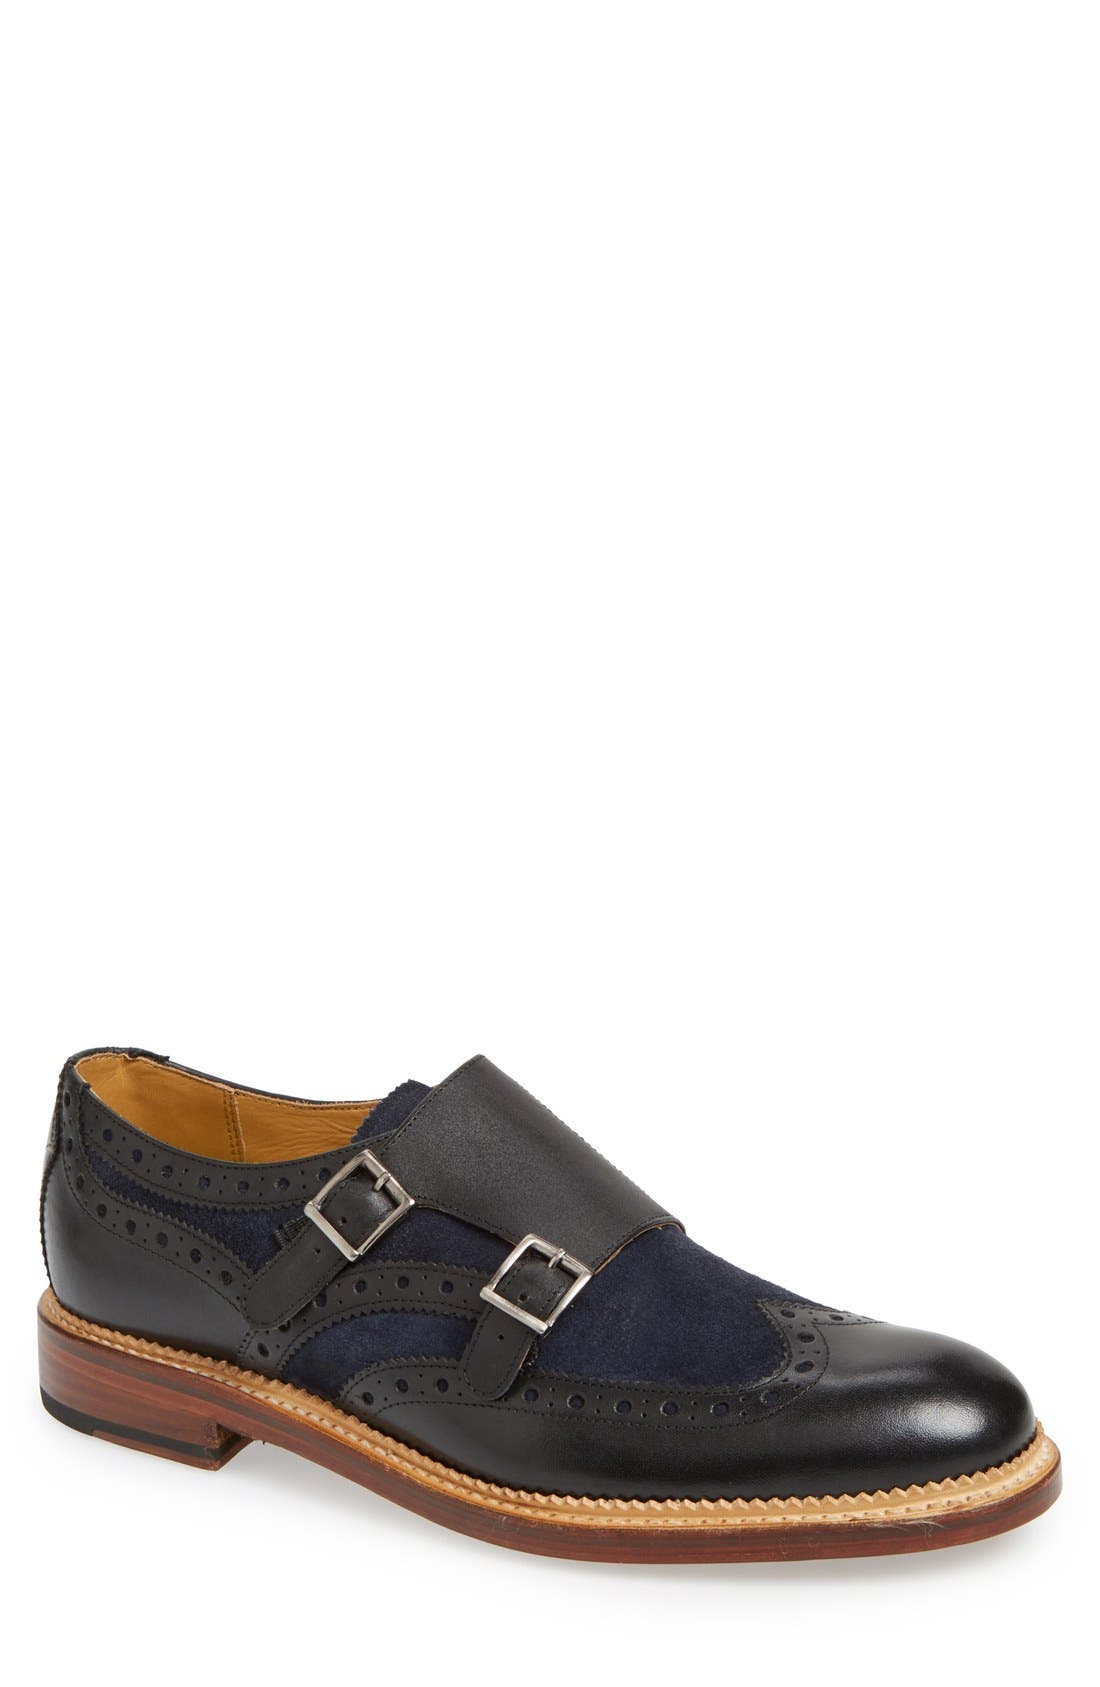 oliver sweeney double monk strap